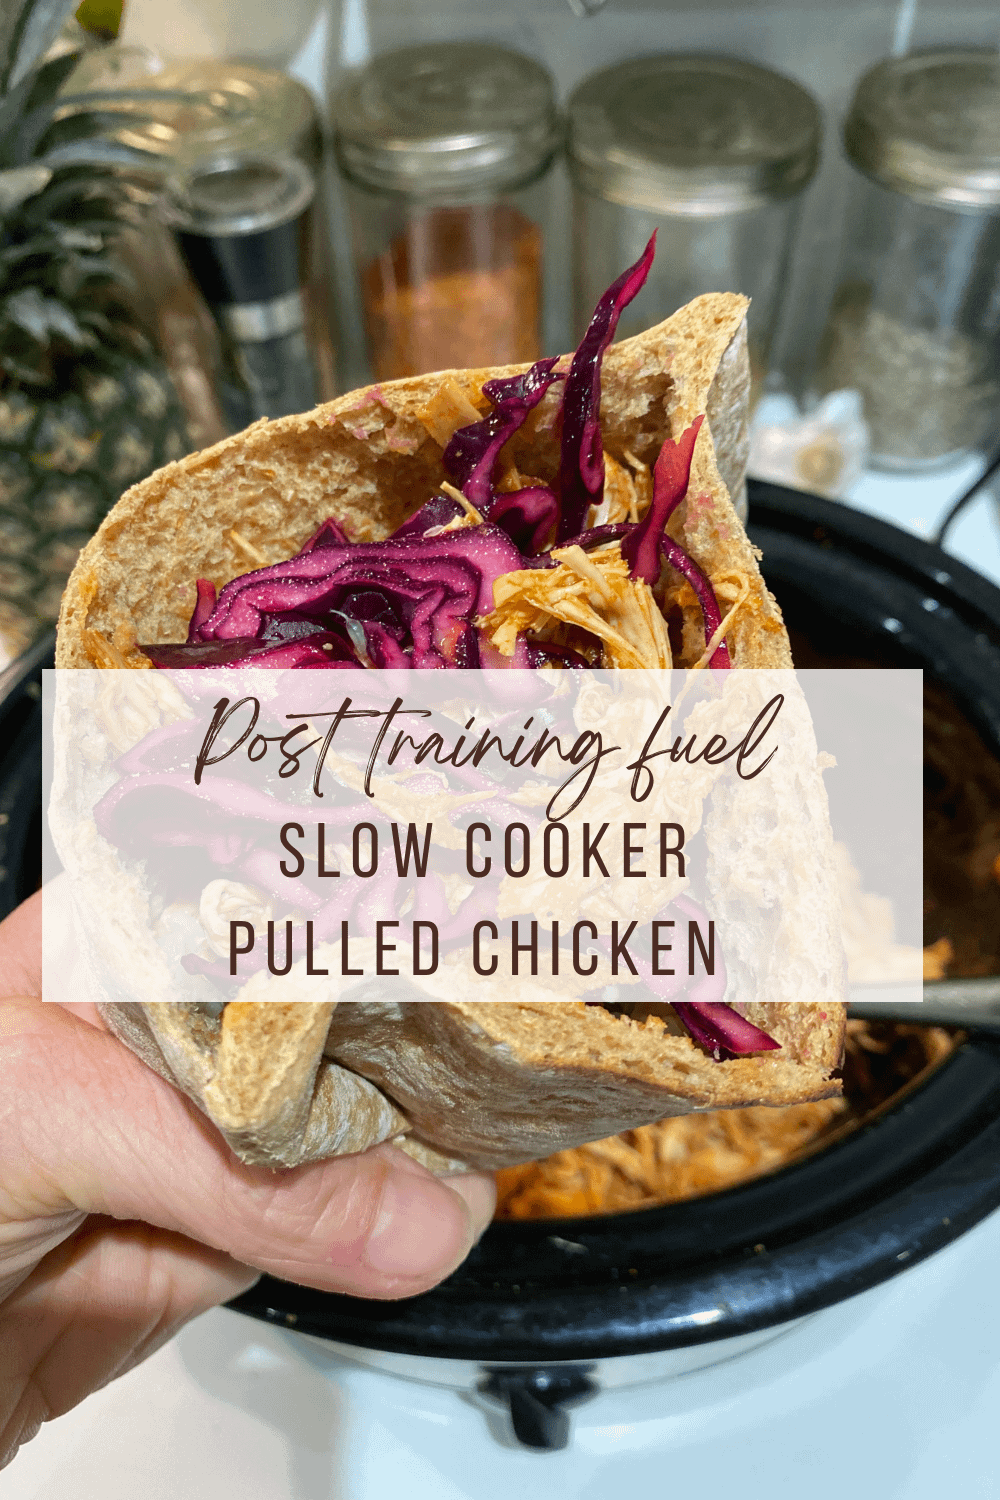 Post training fuel - Slow cooker pulled chicken pittas